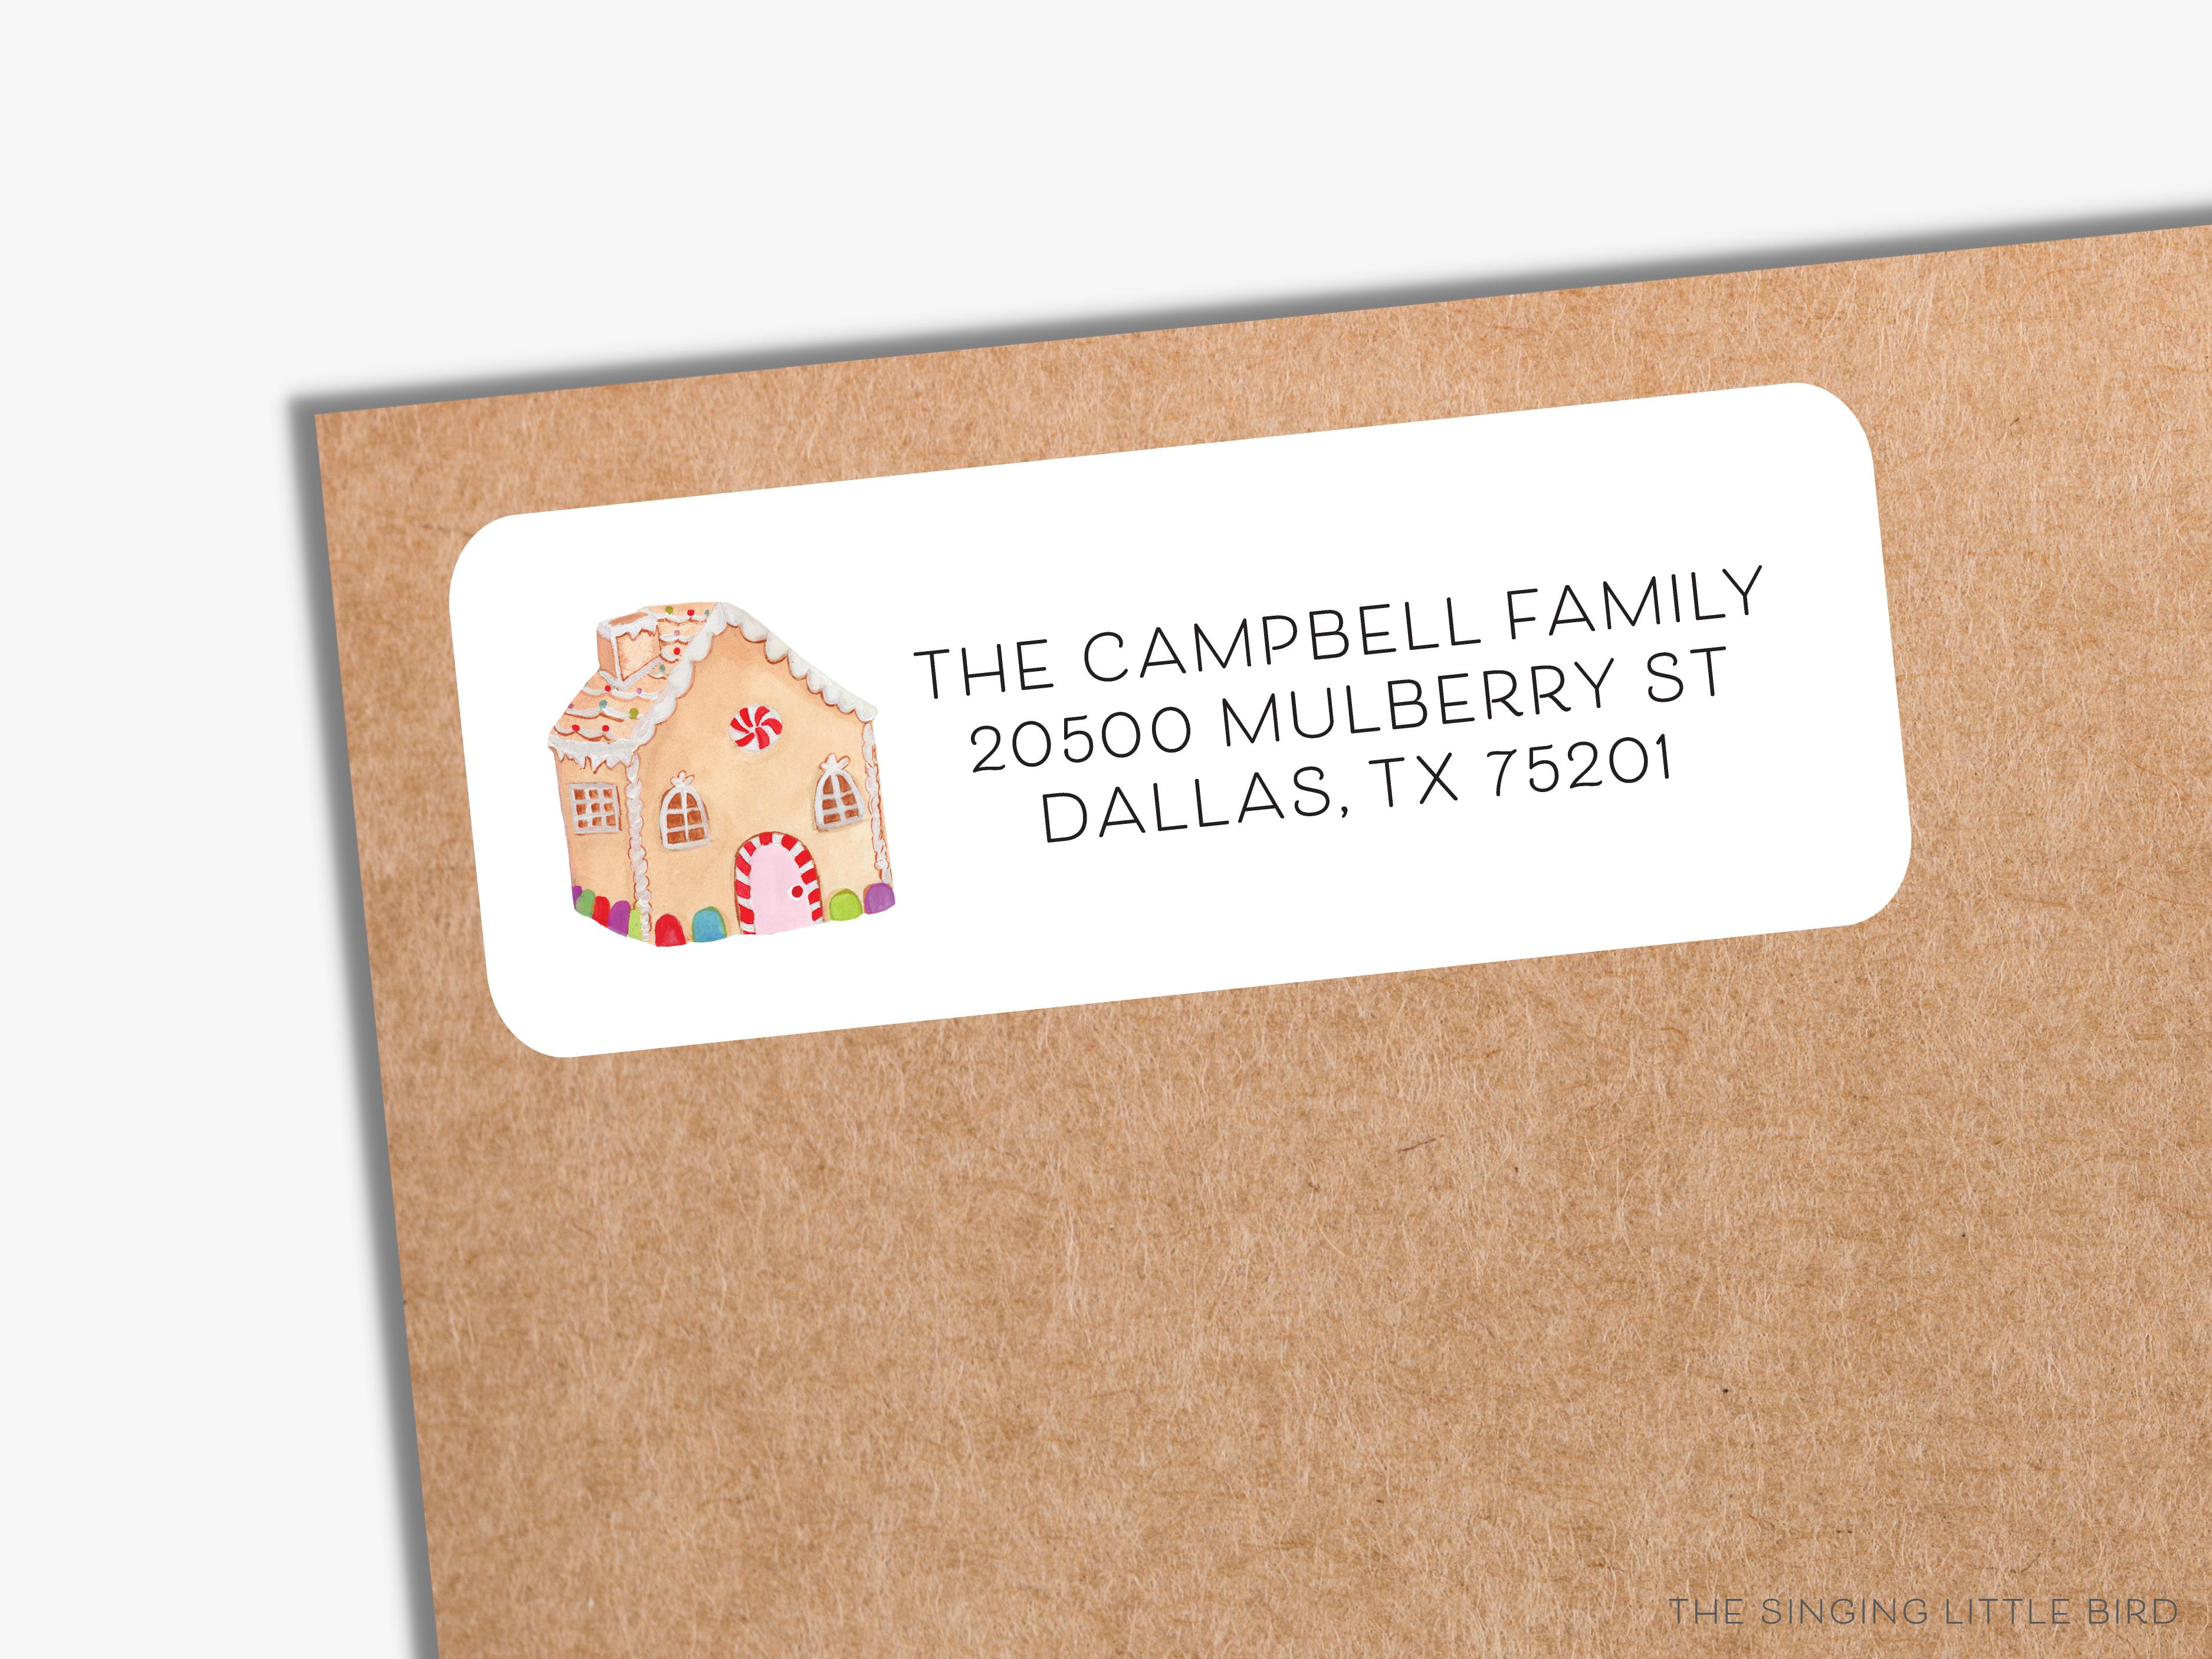 Gingerbread House Return Address Labels-These personalized return address labels are 2.625" x 1" and feature our hand-painted watercolor Gingerbread House, printed in the USA on beautiful matte finish labels. These make great gifts for yourself or the Christmas lover.-The Singing Little Bird